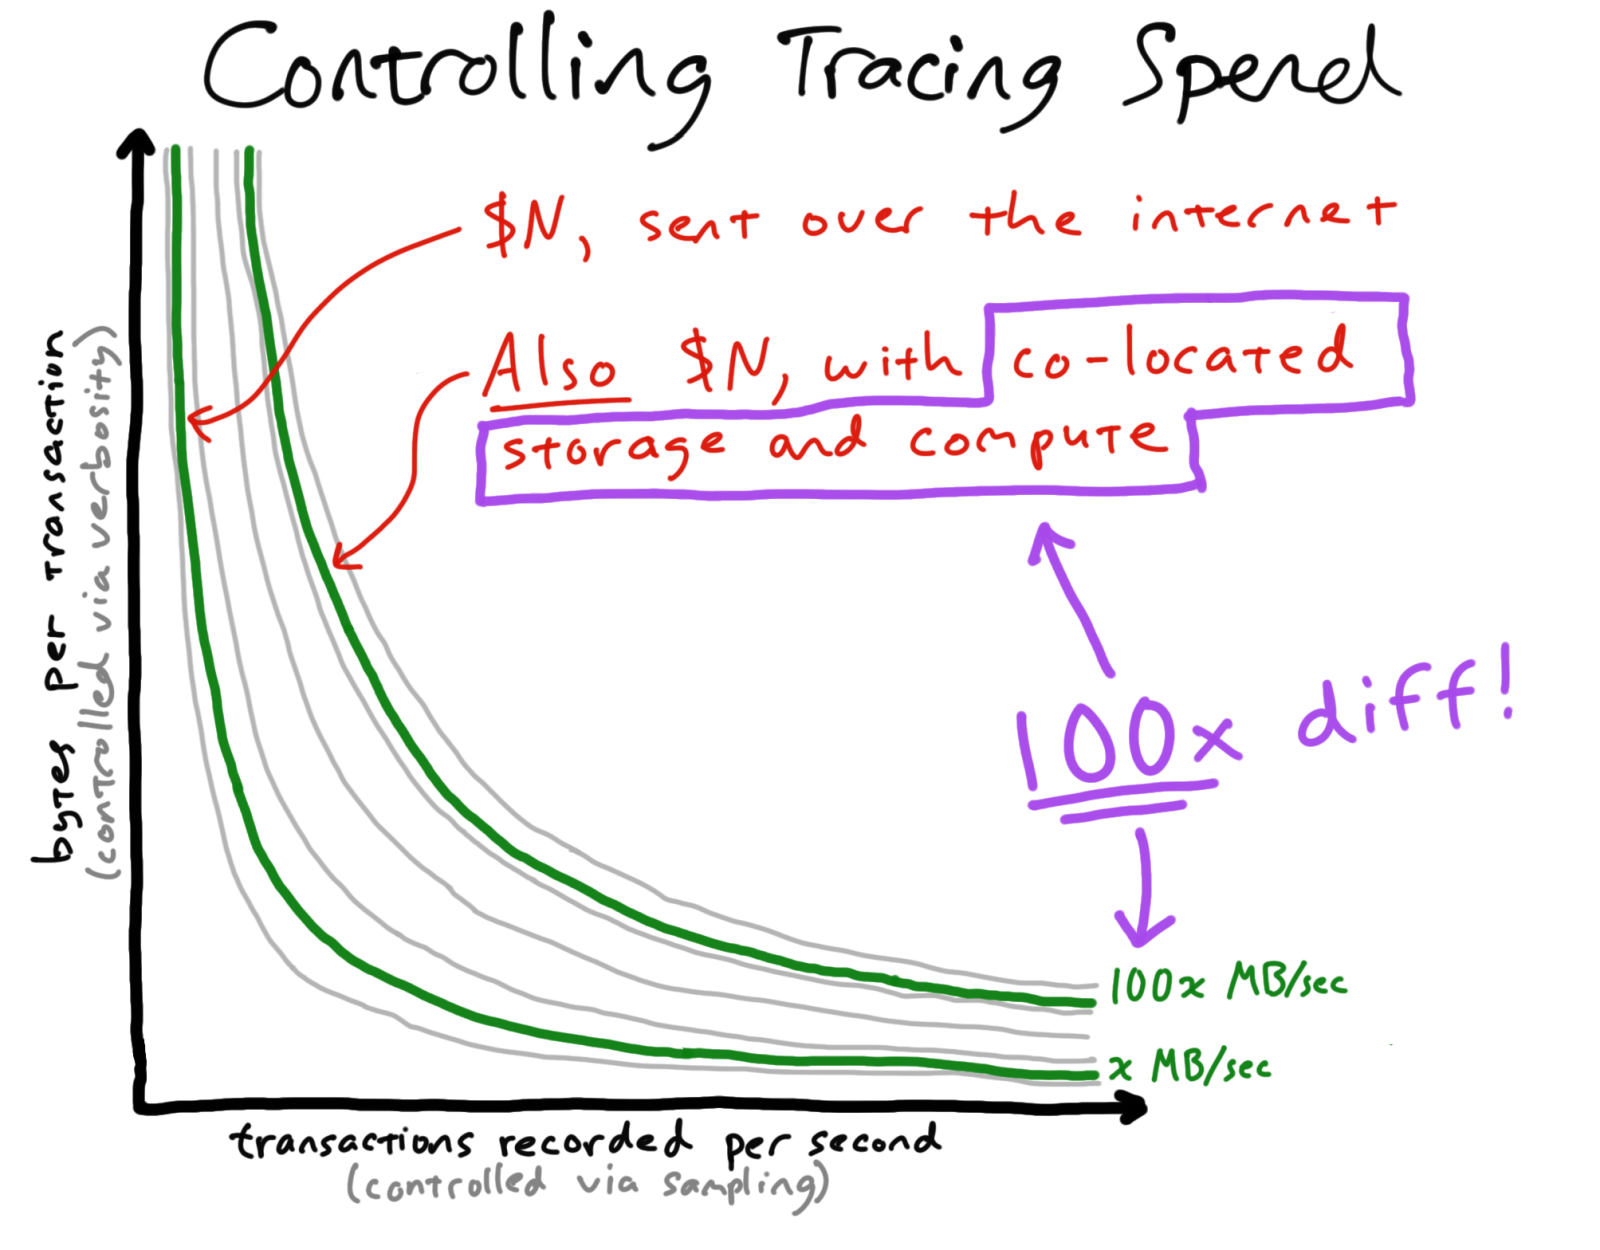 Controlling Tracing Spend